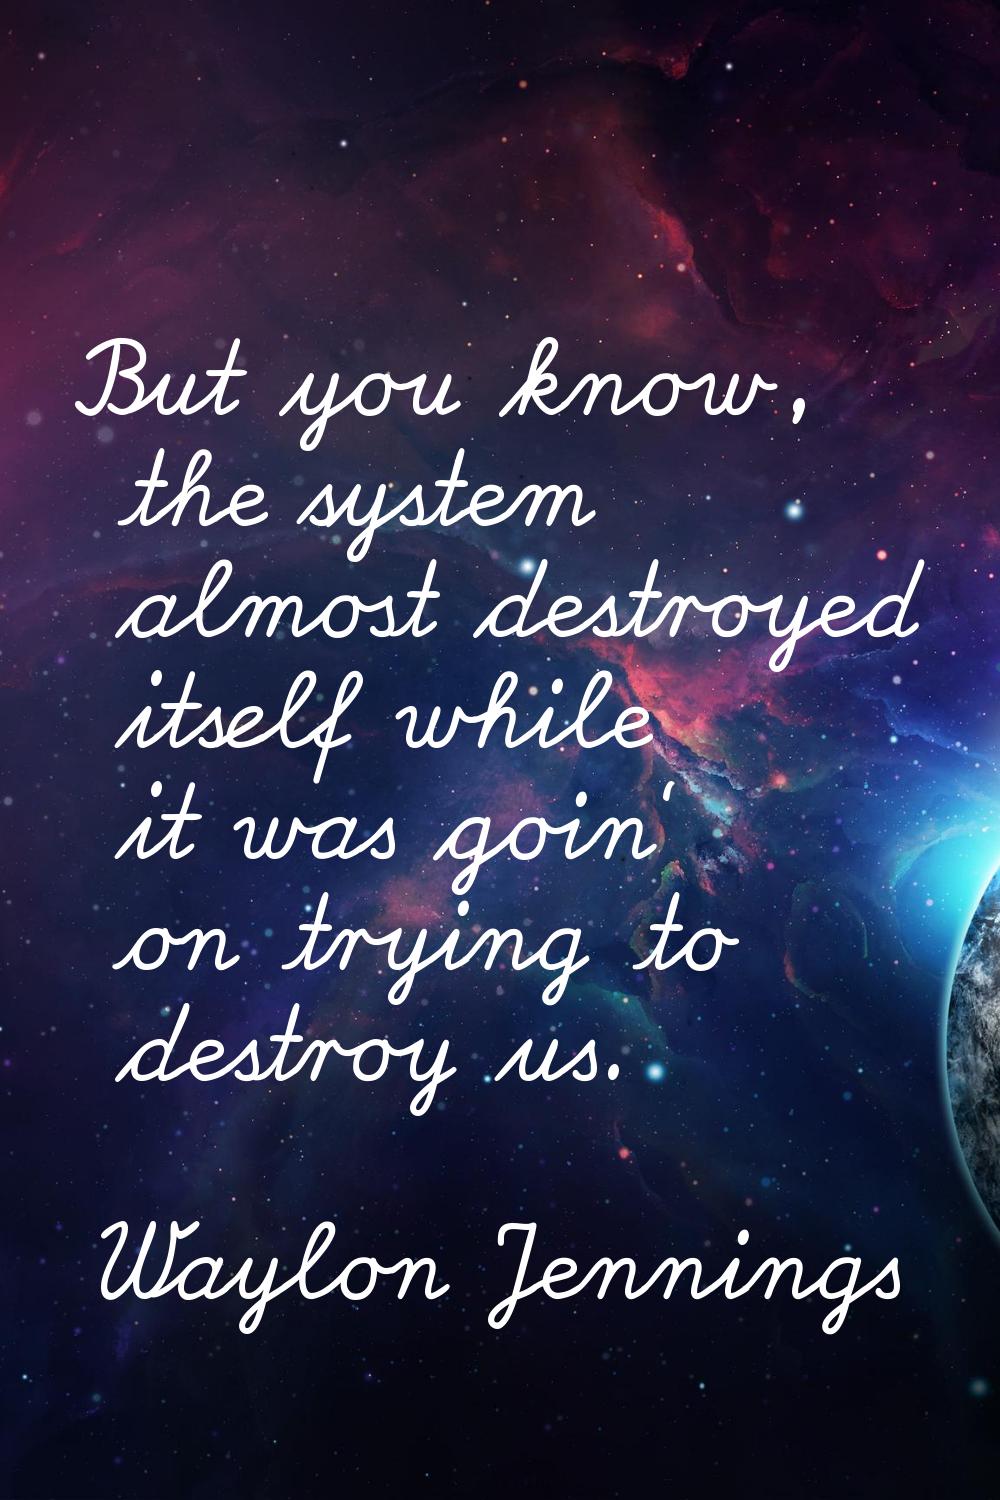 But you know, the system almost destroyed itself while it was goin' on trying to destroy us.